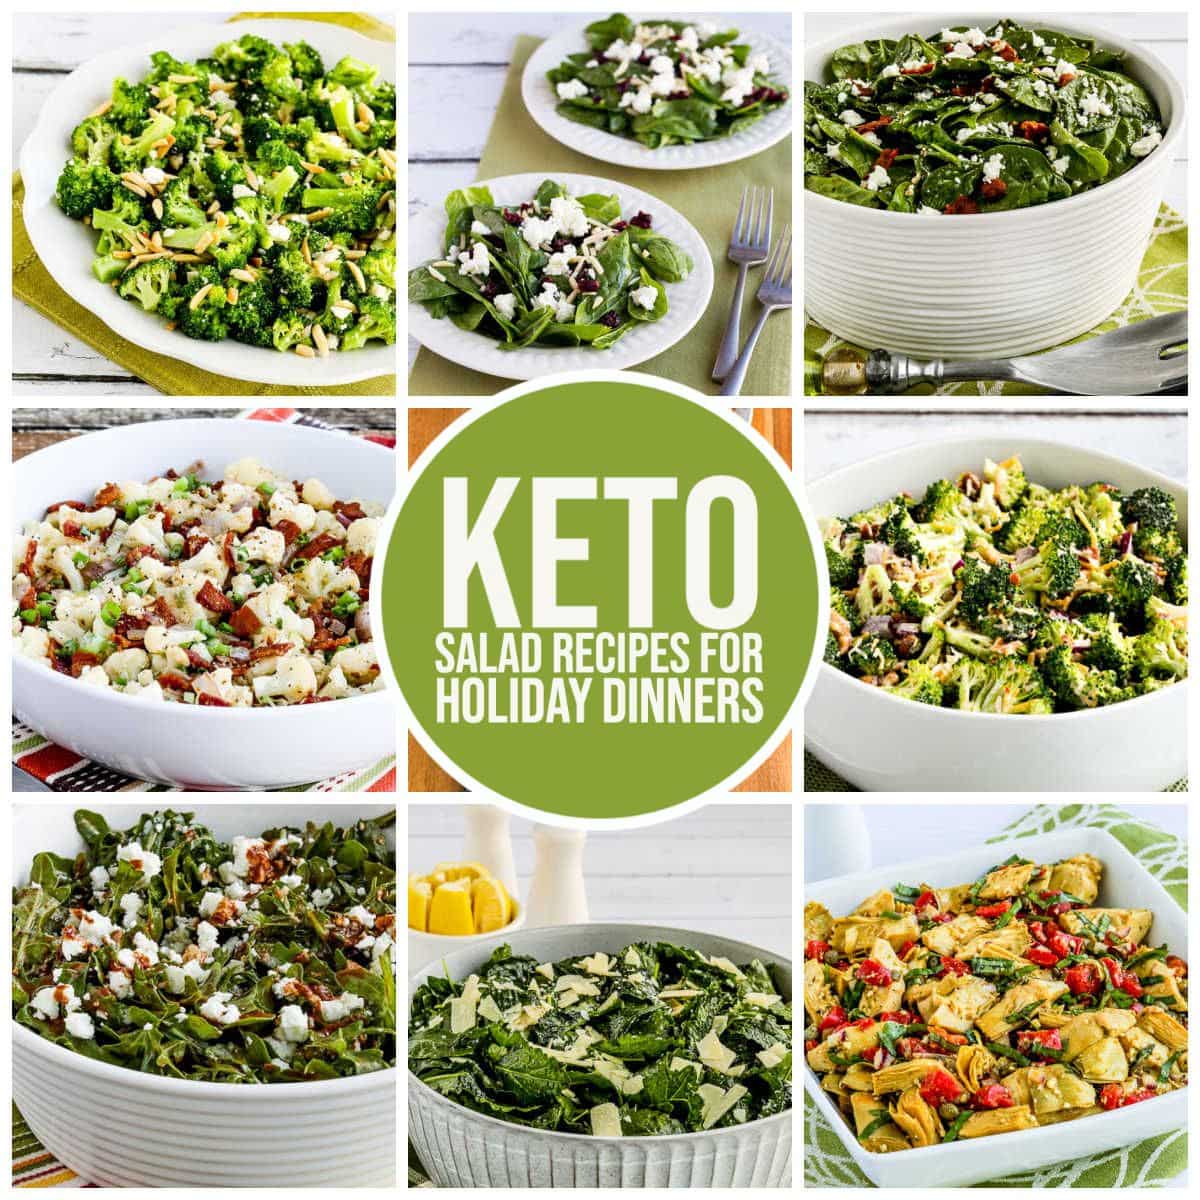 Keto Salad Recipes for Holiday Dinner A collection of premium recipes for holiday dinners 2 premium recipes with text overlay